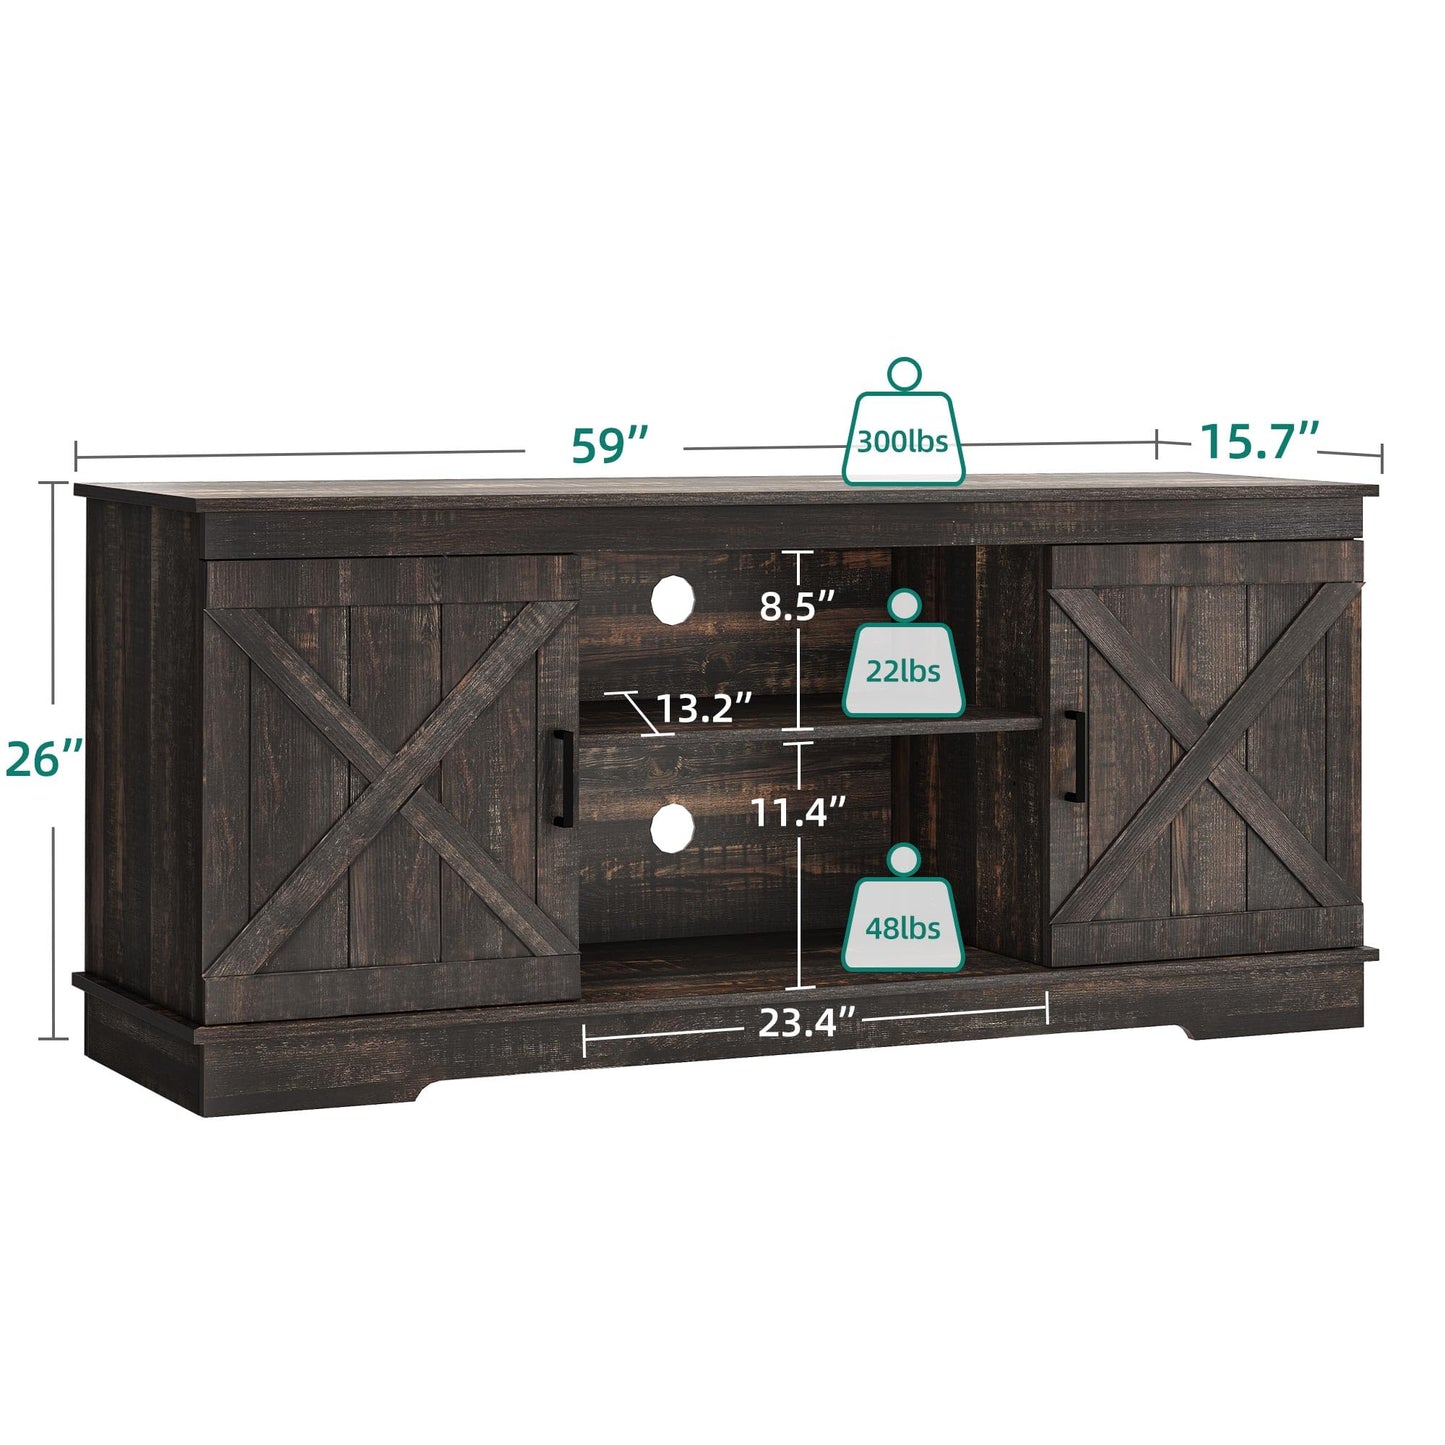 YITAHOME Buffet Cabinet, 59.5" Farmhouse Sideboard Buffet Storage Cabinet with Barn Door Coffee Bar Cabinet with Capacity 300 lbs for Home Dinning Living Room,Dark Rustic Oak, 26“ Height